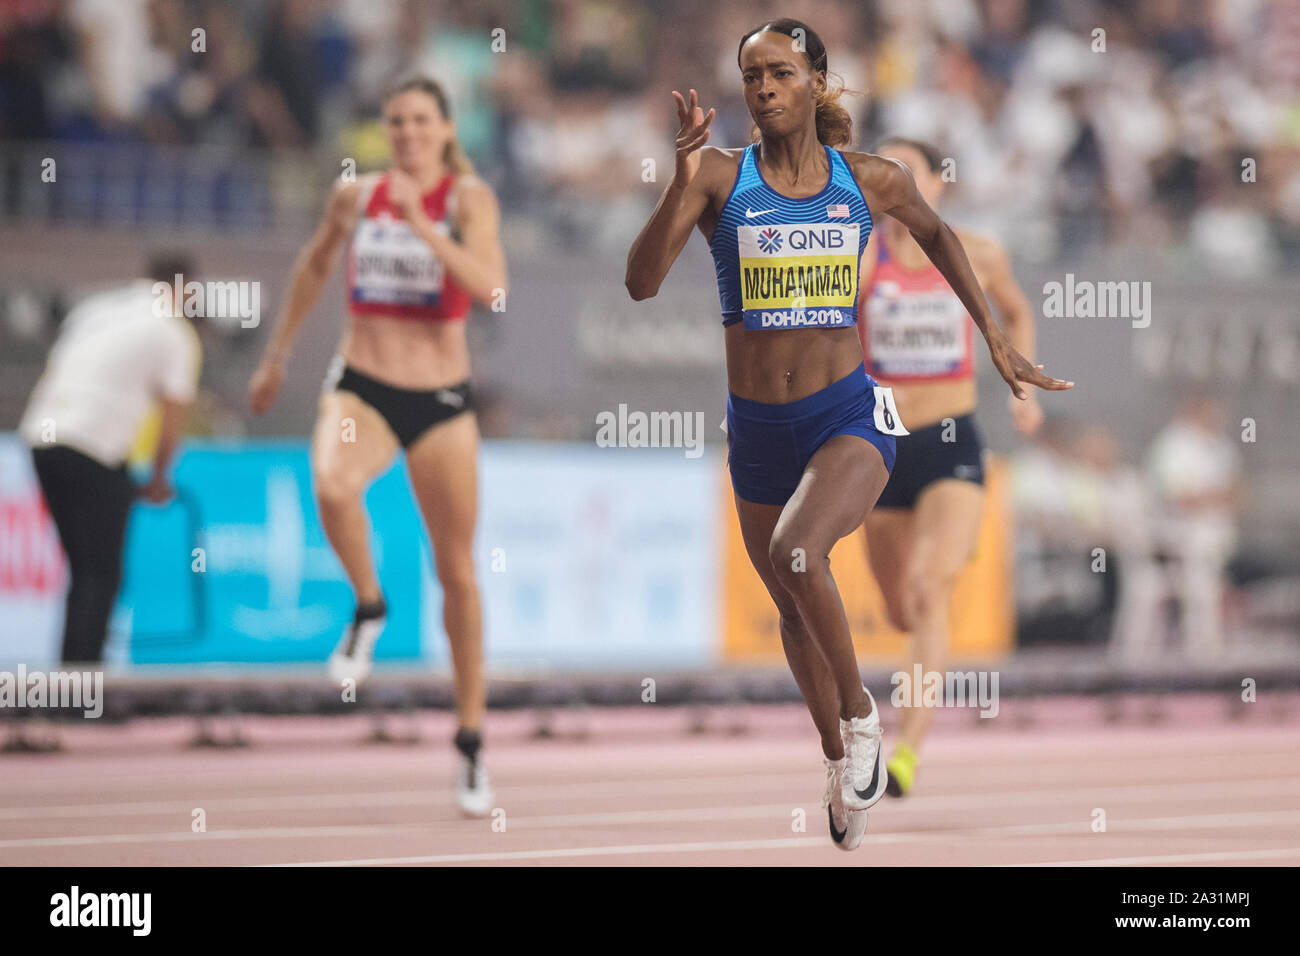 Doha, Qatar. 04th Oct, 2019. Athletics, IAAF World Championship at Khalifa  International Stadium: 400 meters hurdles, women, final. Delilah Muhammad  from the USA wins the race in world record time. Credit: Oliver